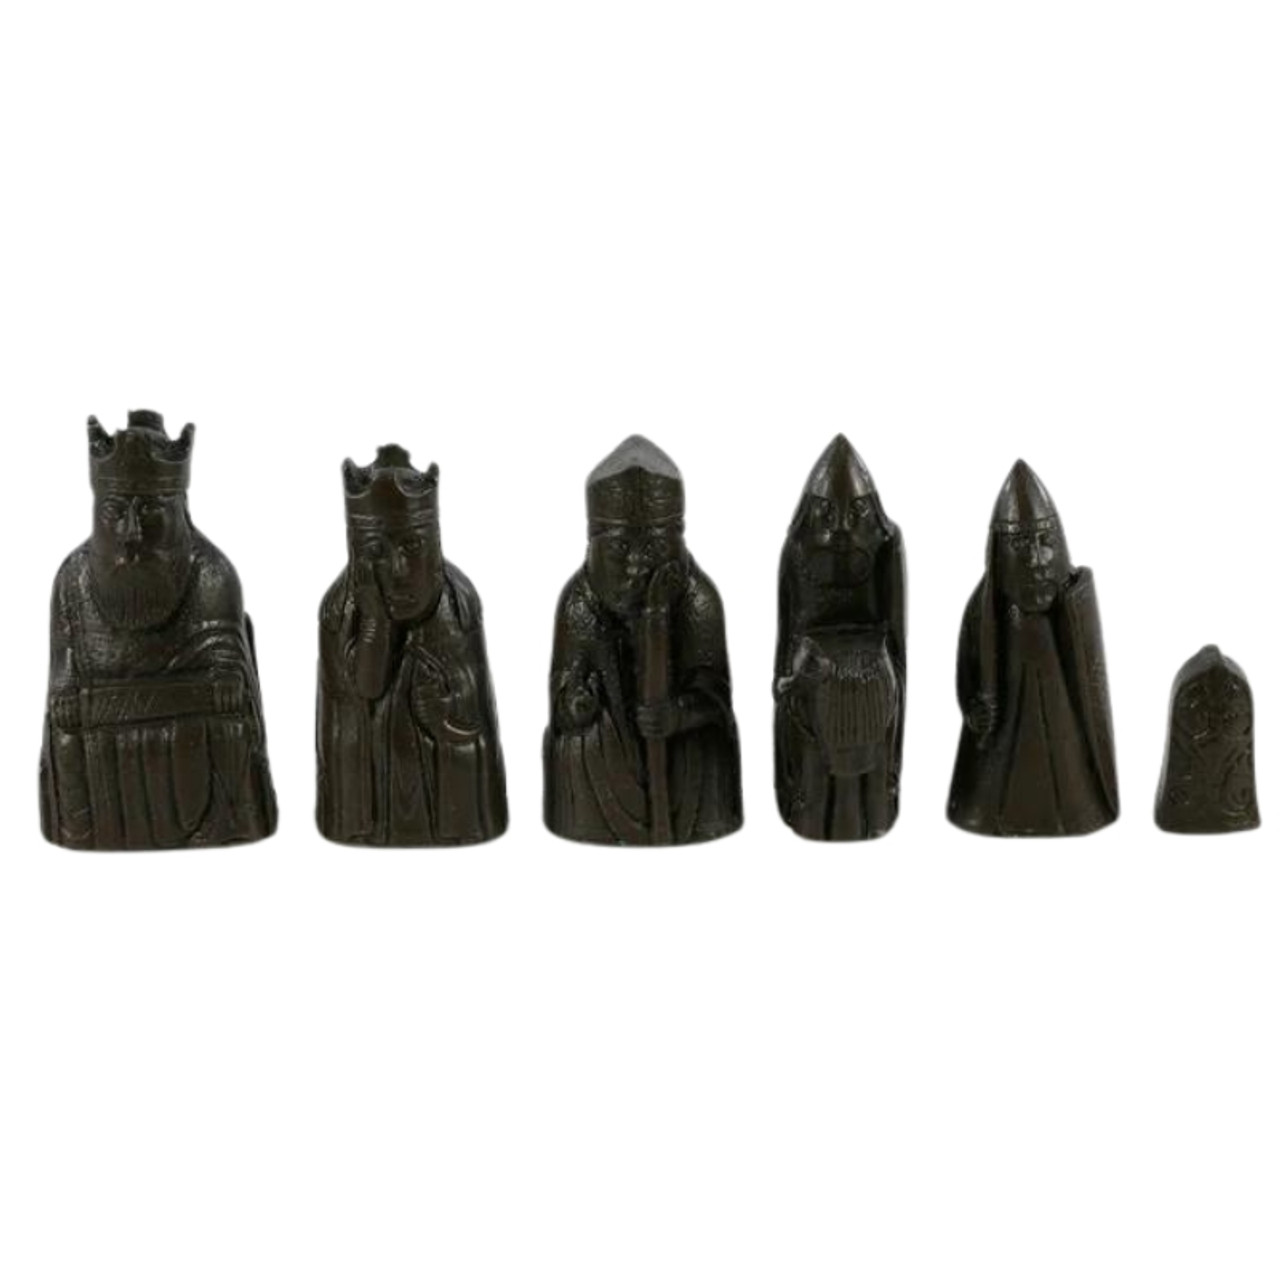 The Isle of Lewis Chess Pieces - Stone Resin Antique White and Rust Brown with 3.5" King black pieces